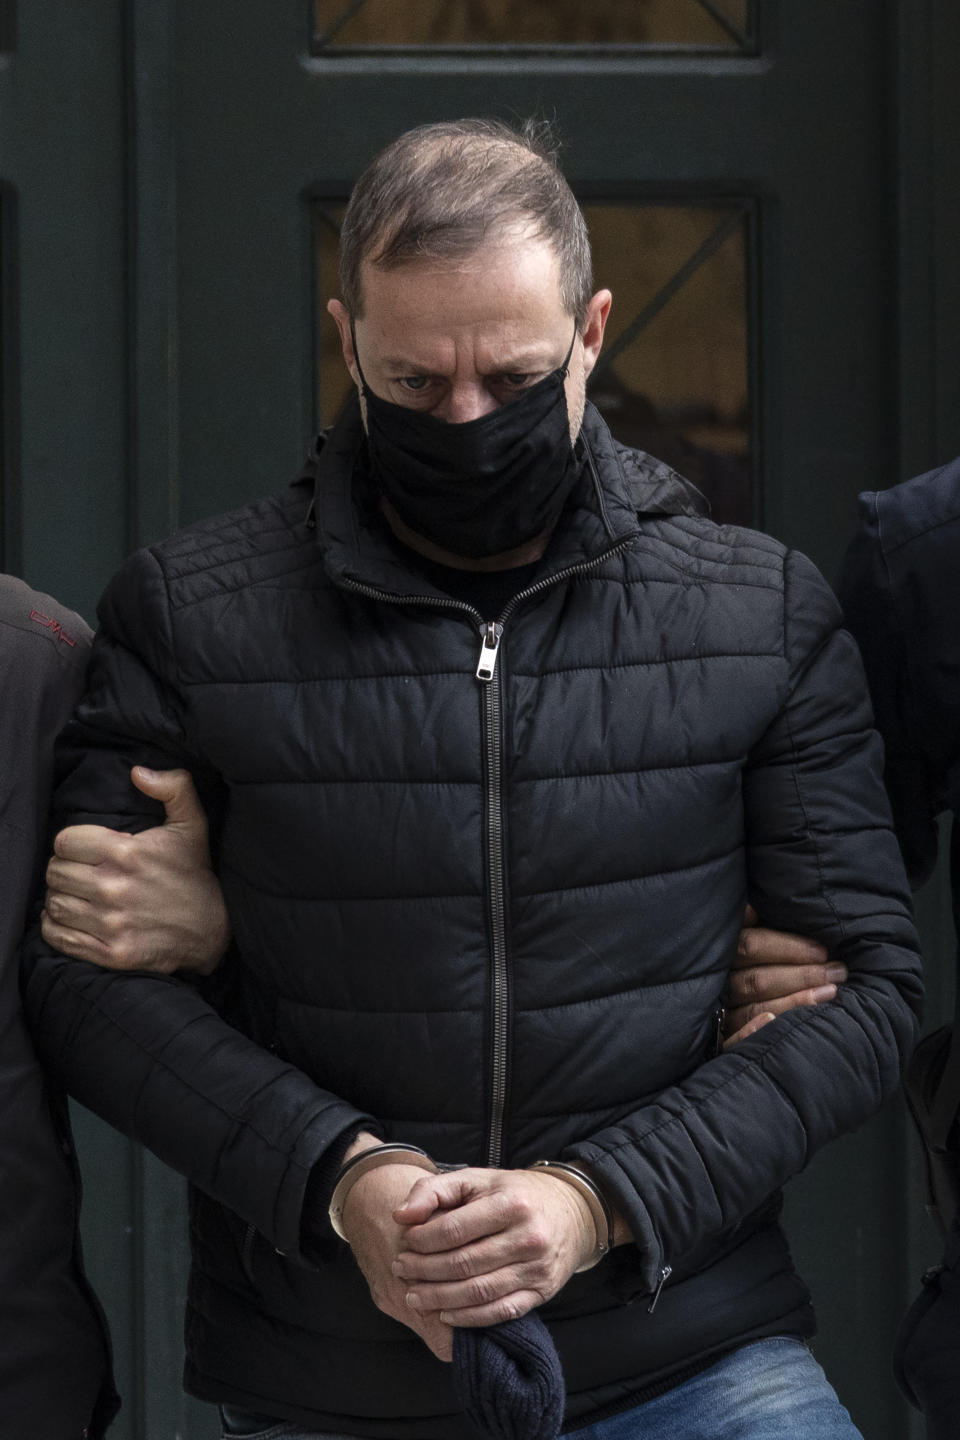 Handcuffed actor and director Dimitris Lignadis, leaves a magistrate's office in Athens, Sunday, Feb. 21, 2021. Lignadis, 56, the former artistic director of Greece's National Theatre, has been arrested on rape charges, police say. (AP Photo/Yorgos Karahalis)